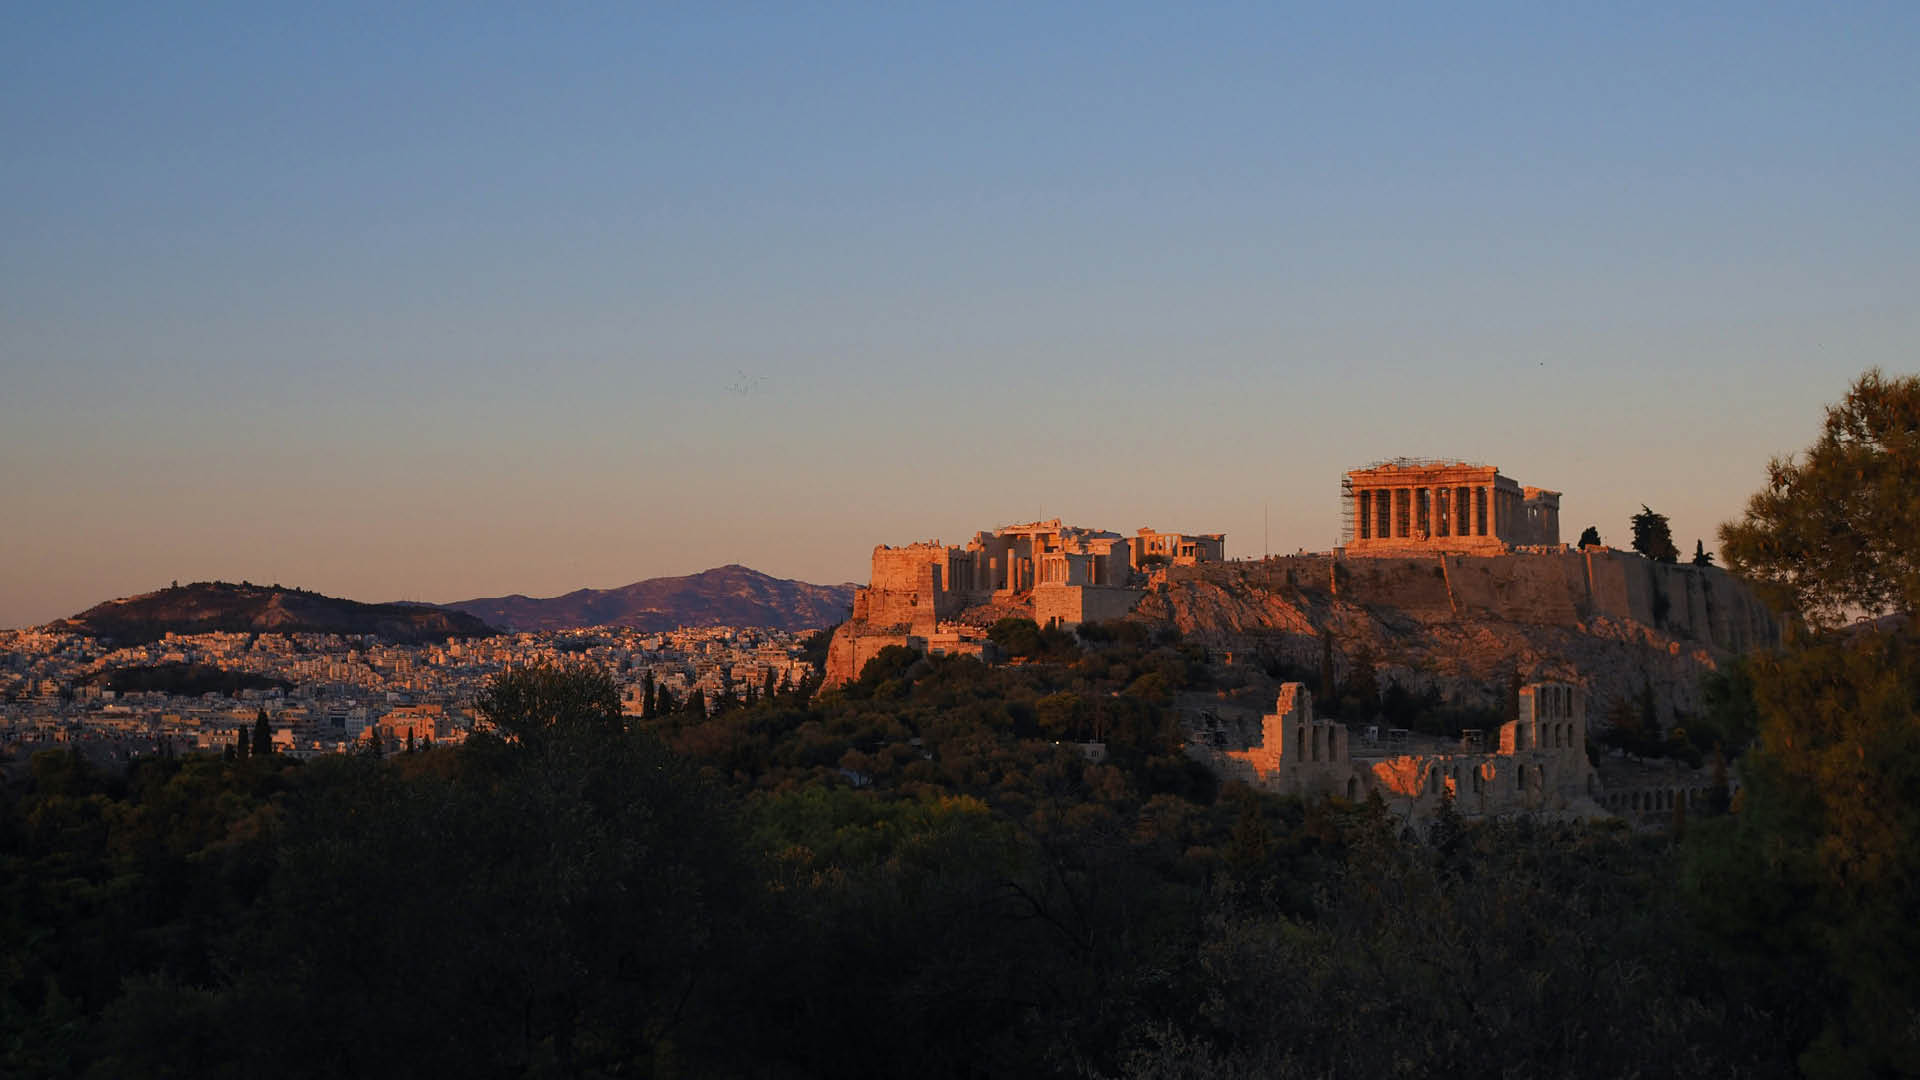 The Parthenon of Athens at dusk, as seen from Philopappos Hill